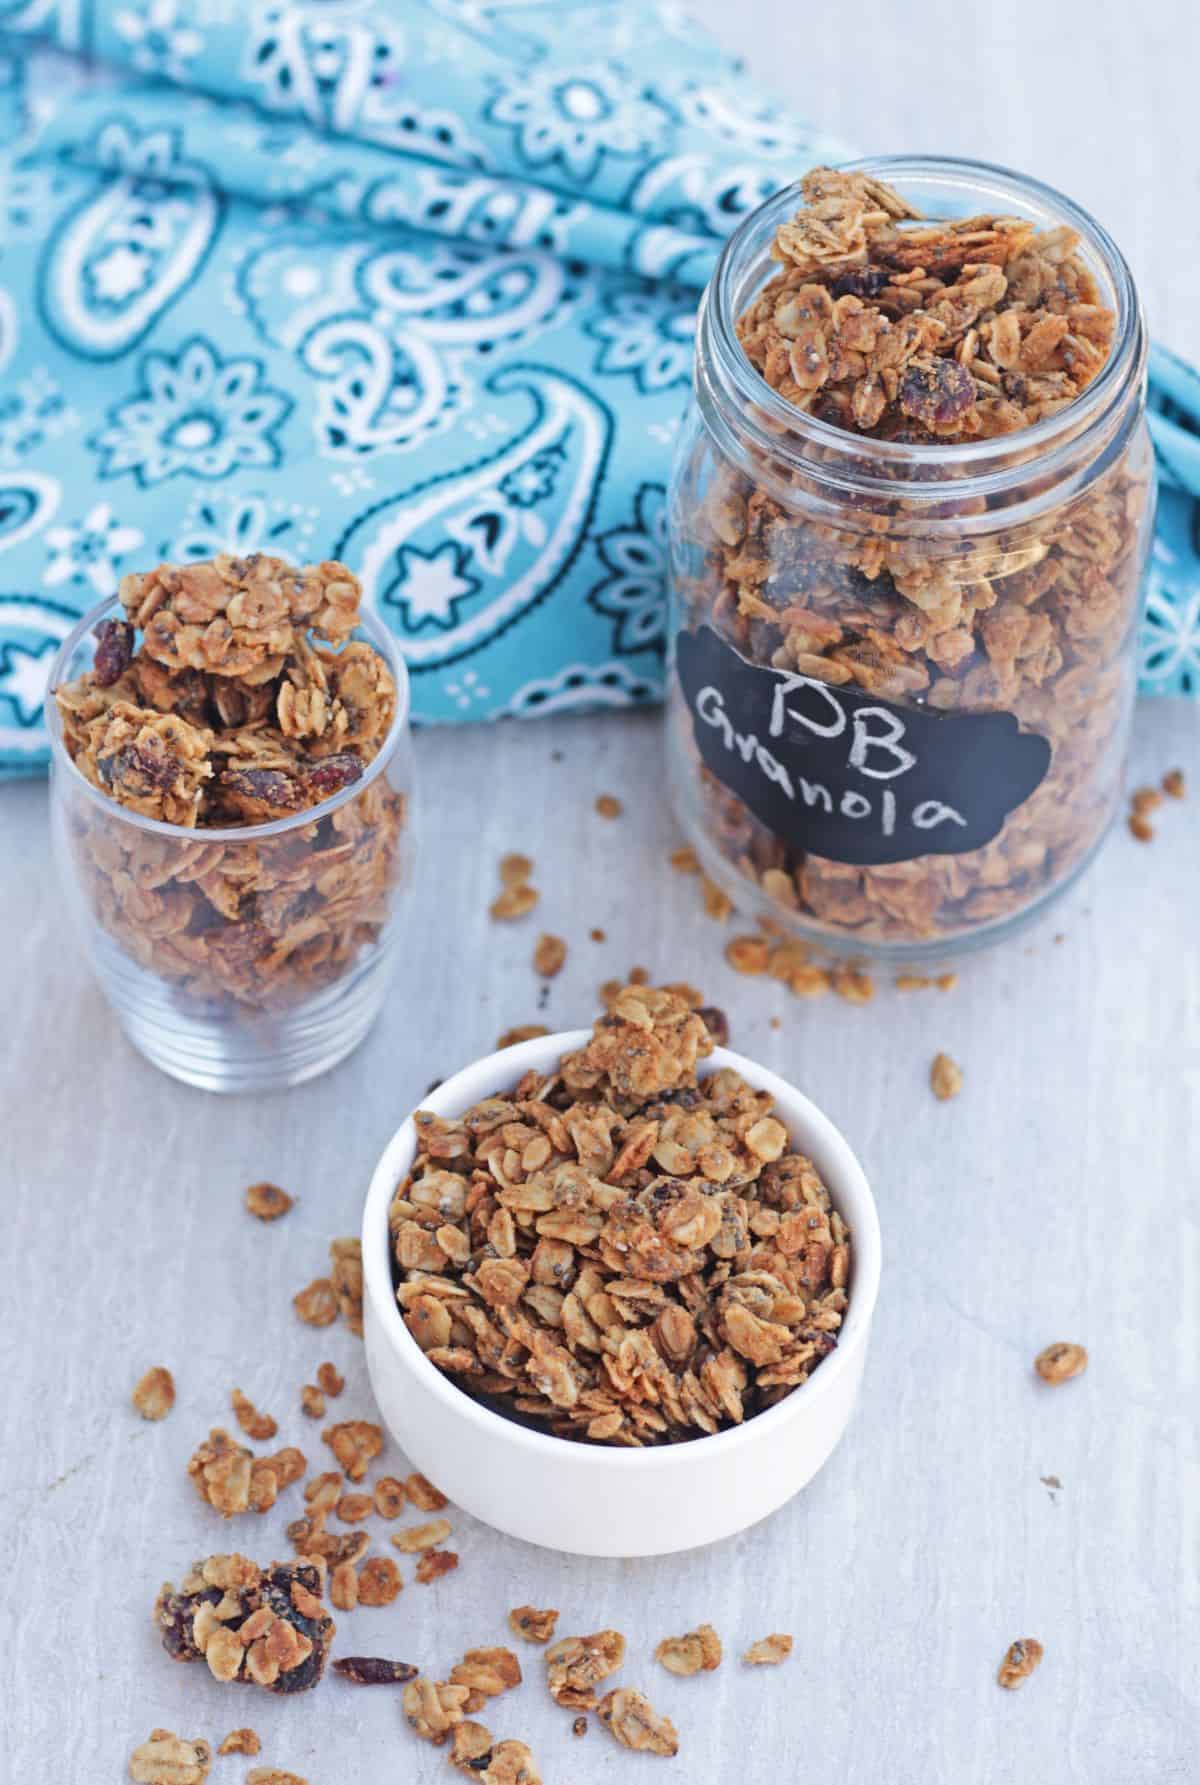 granola in a jar and bowls and blue napkin in the background